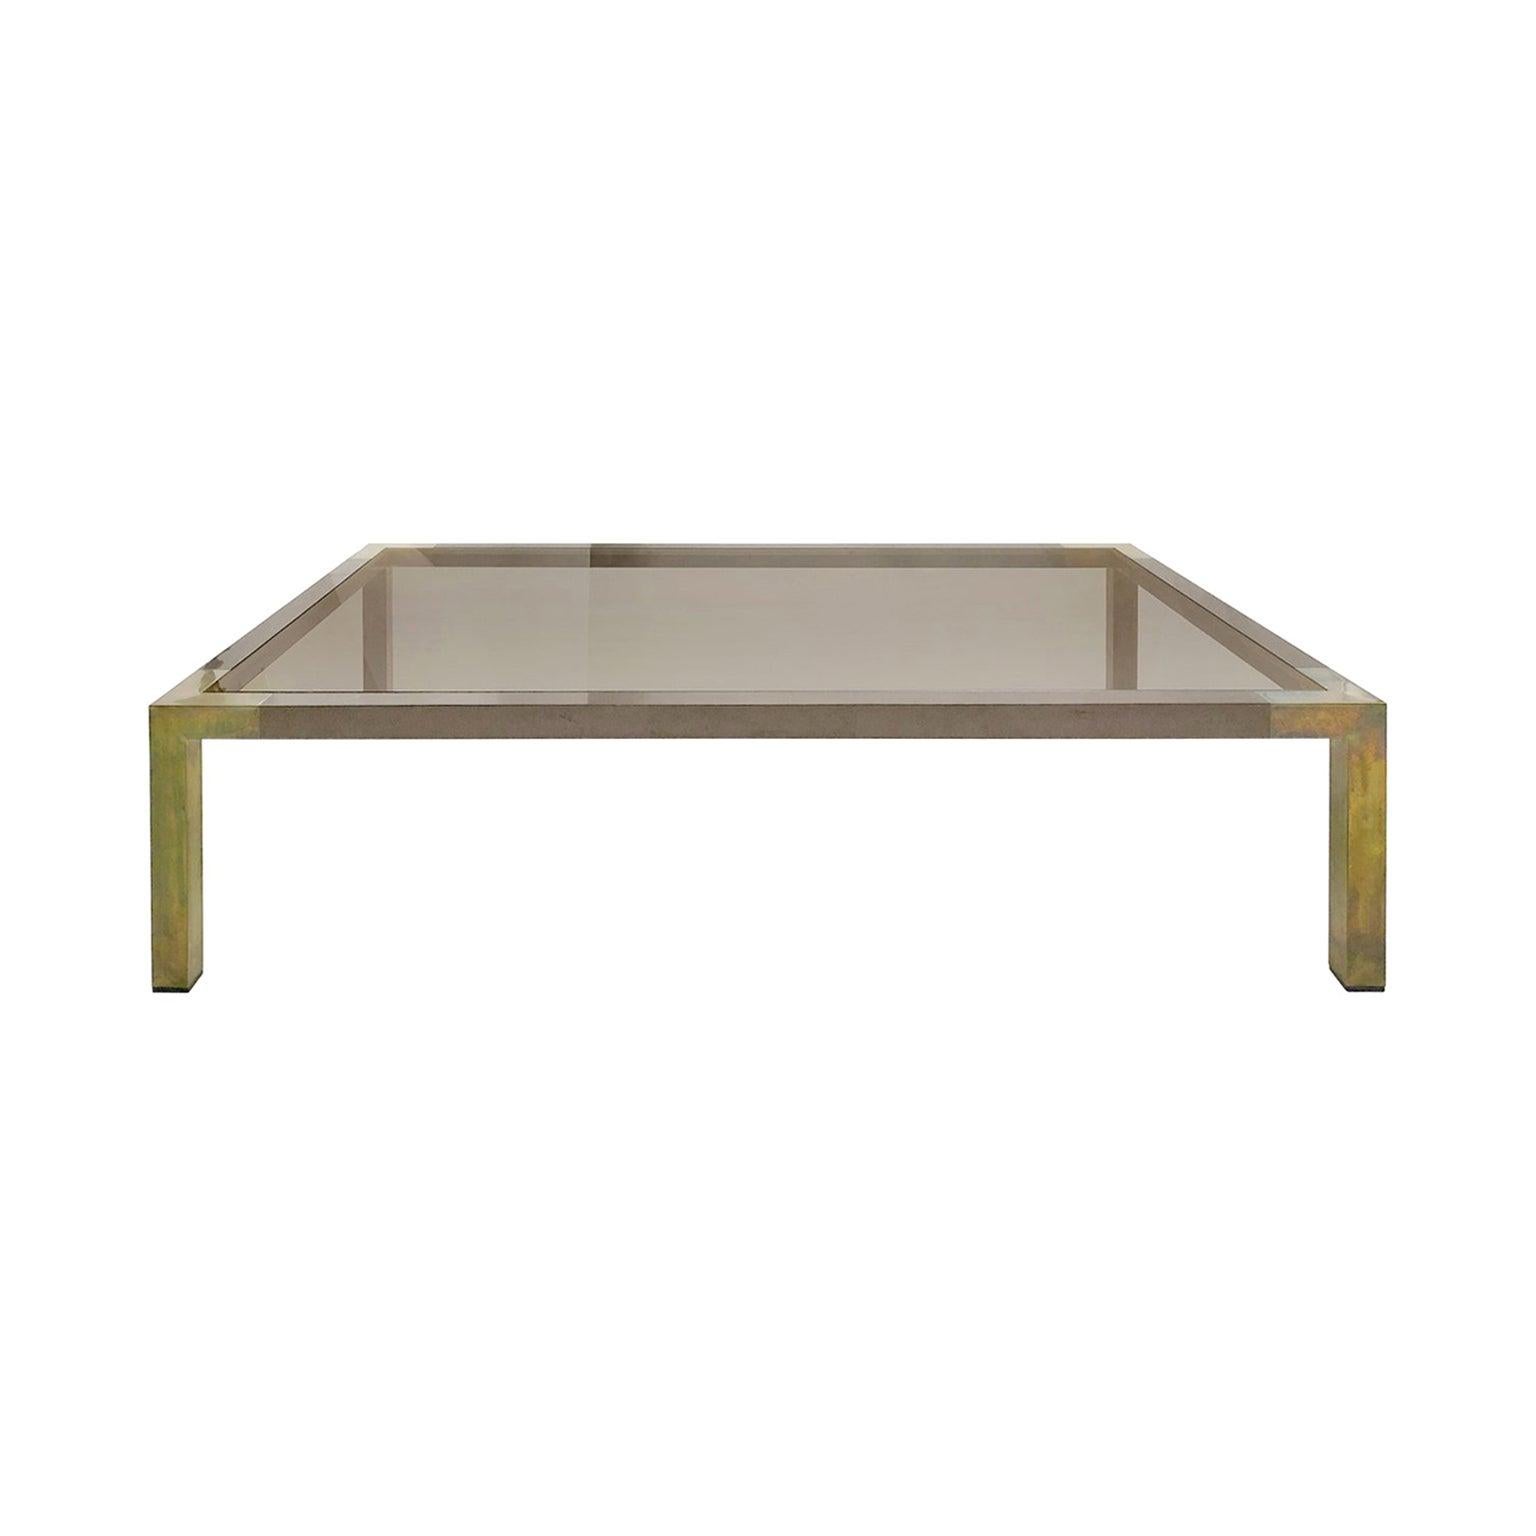 Rectangular two-tone bronze coffee table with smoked glass top by Willy Rizzo, France, 1970s.
 